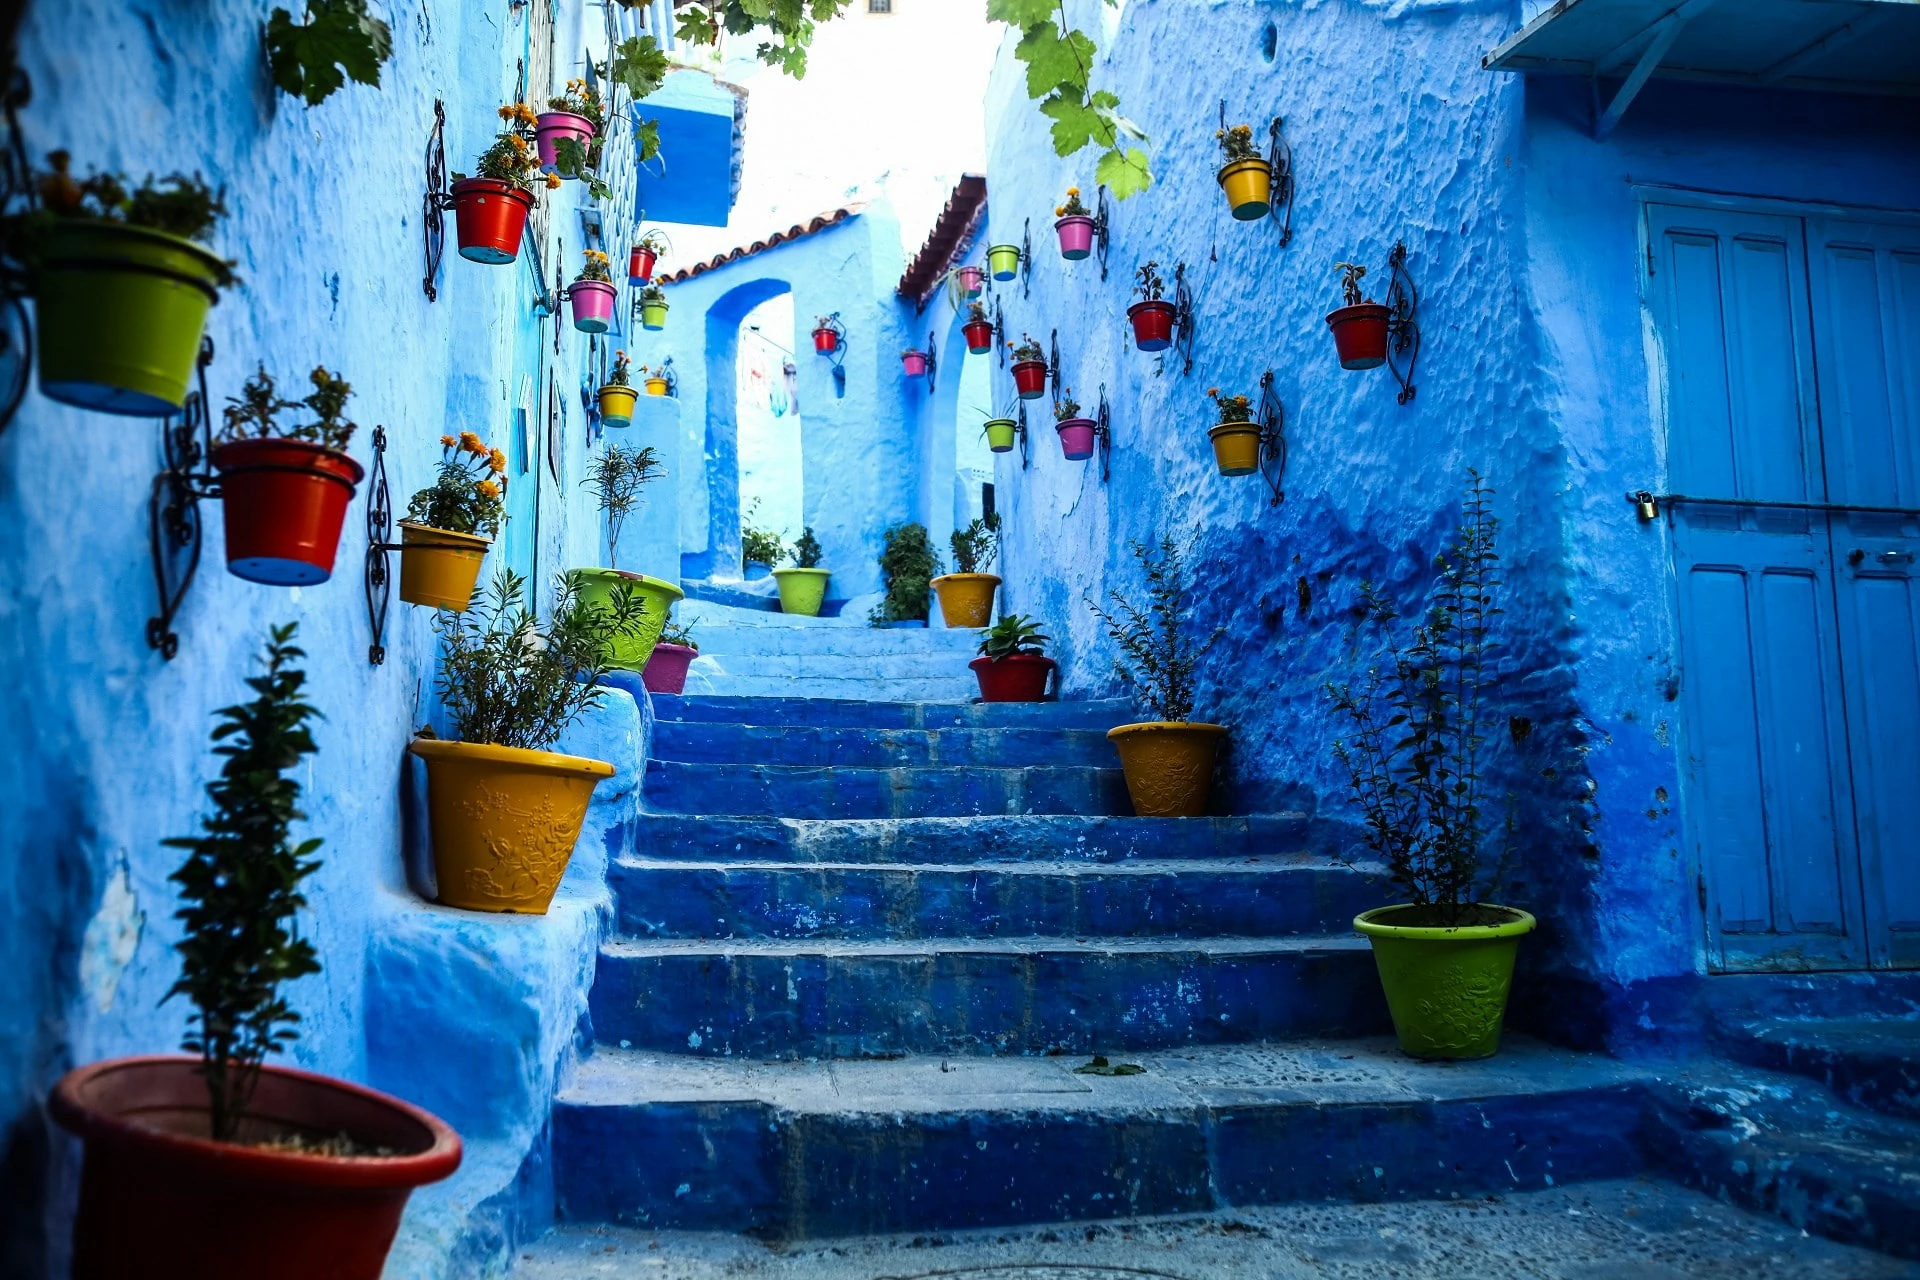 is chefchaouen the blue city in morocco worth visiting